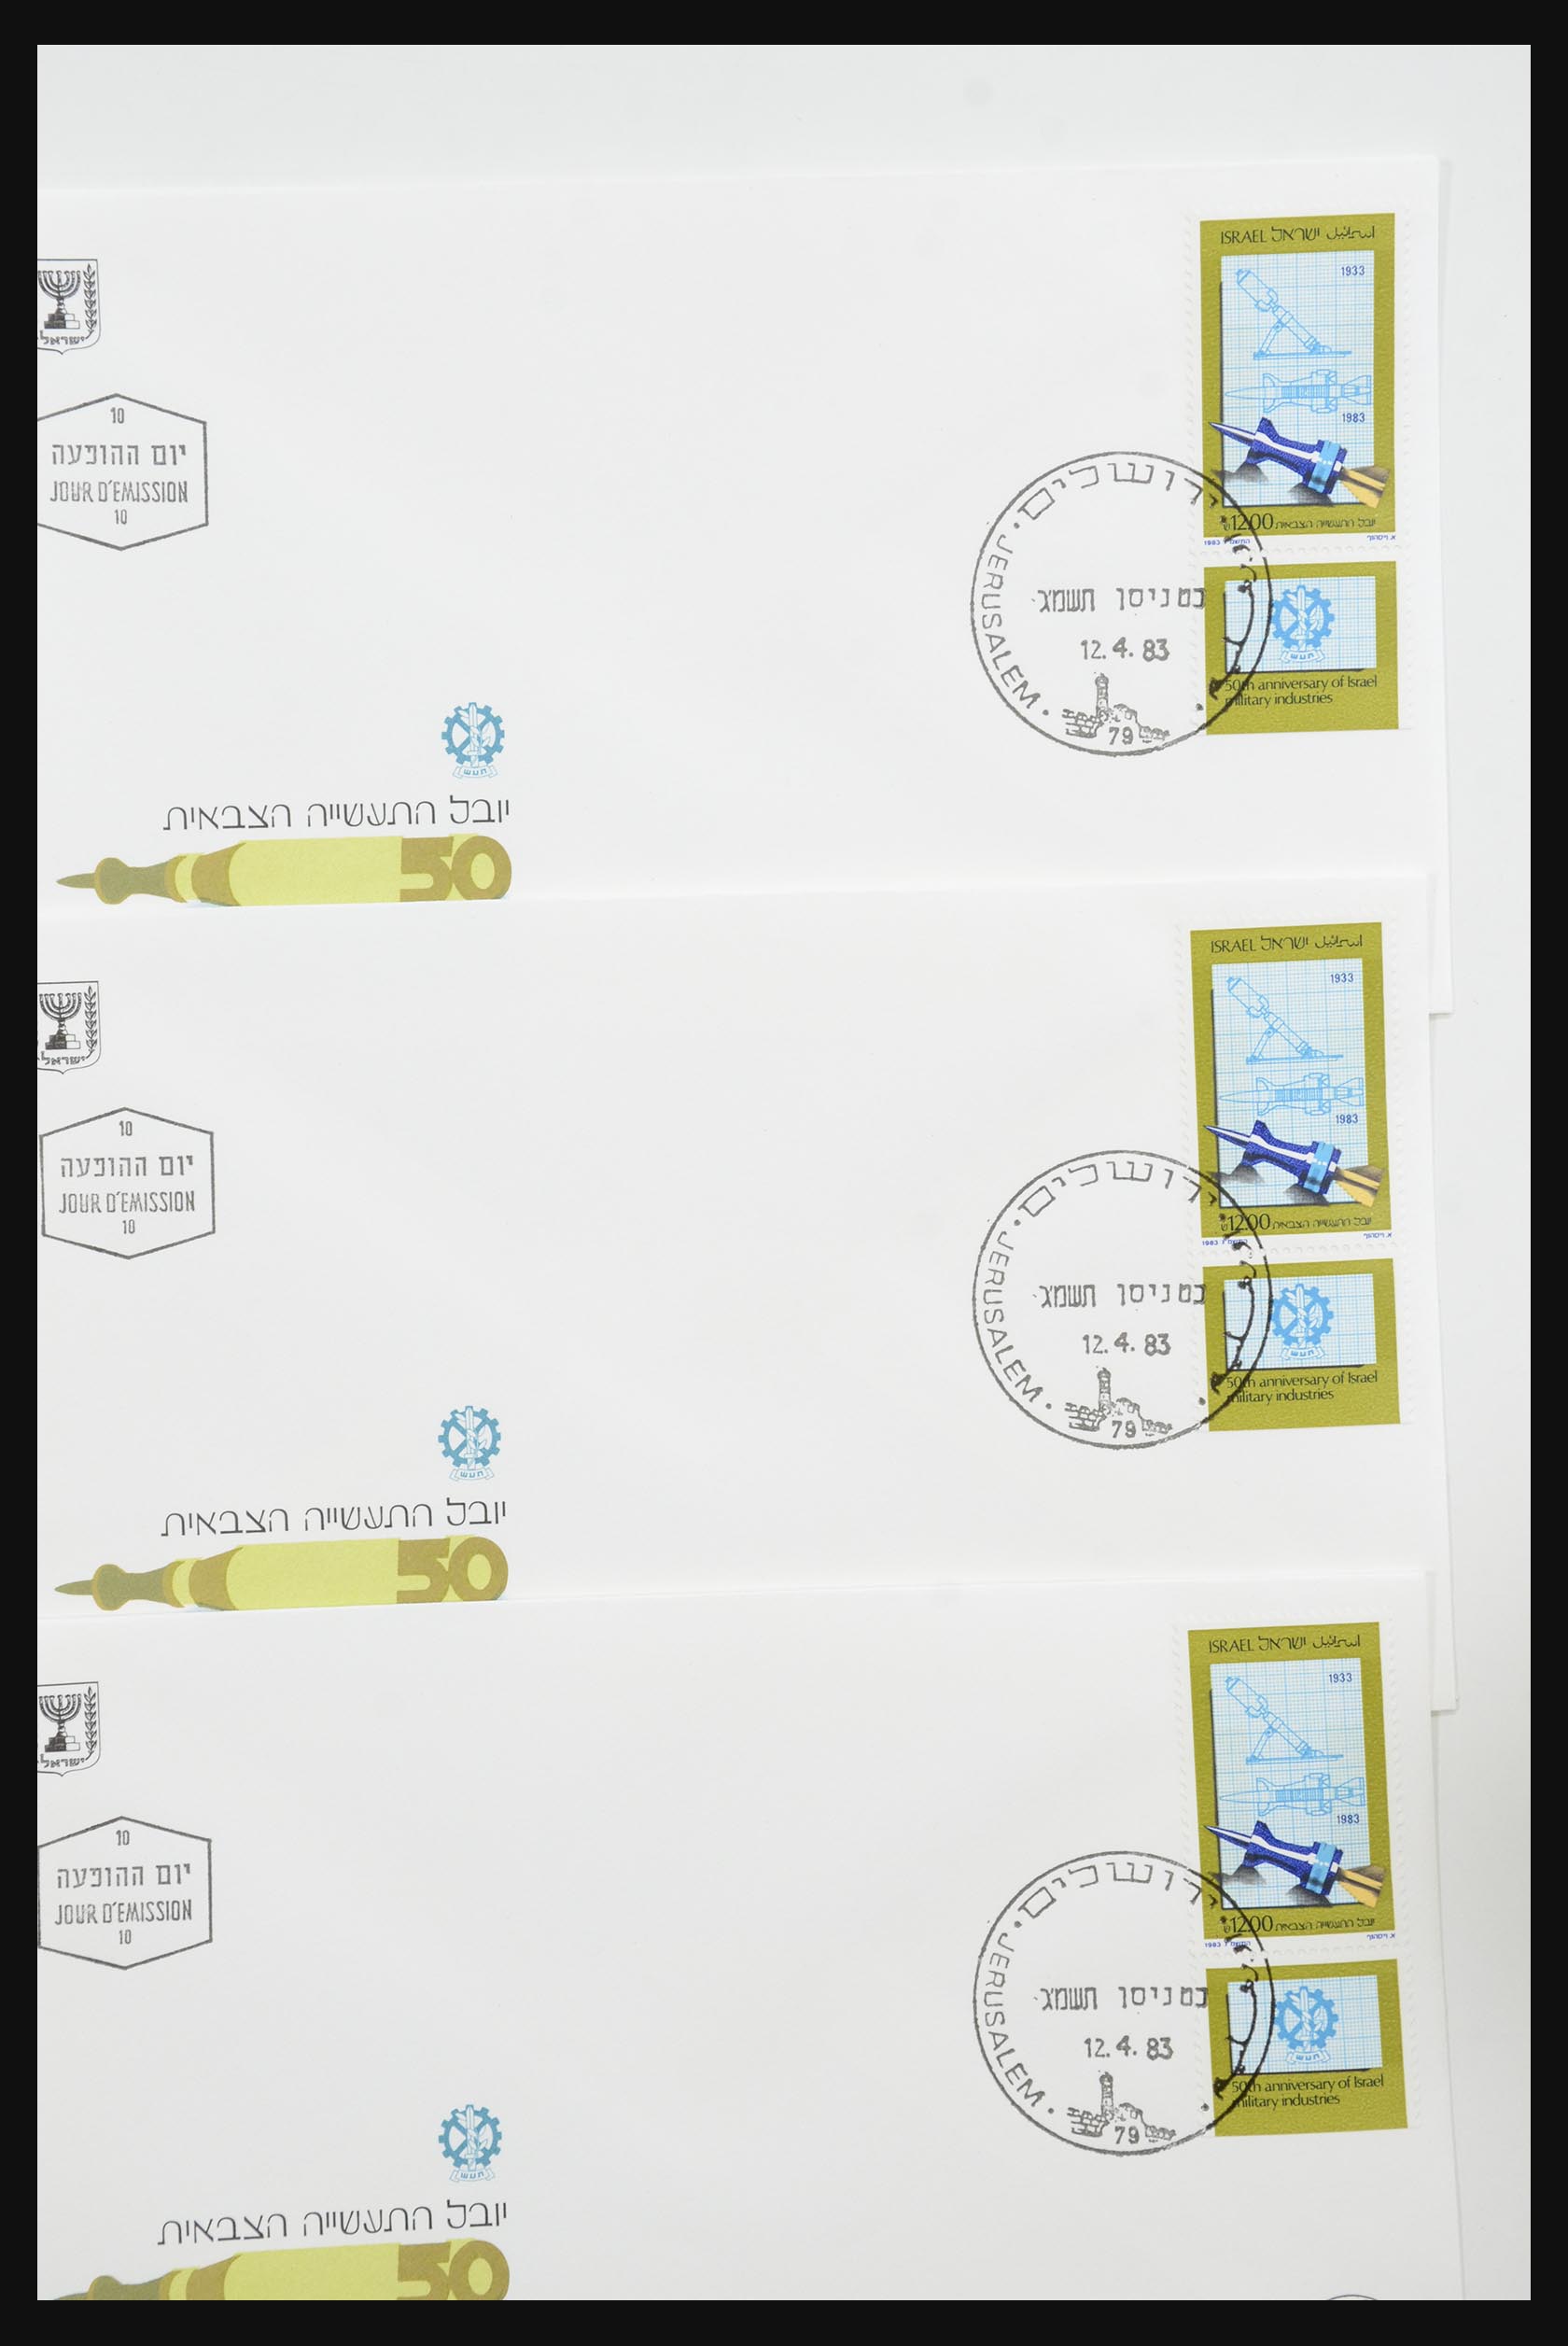 31924 014 - 31924 Israël fdc-collectie 1957-2003.